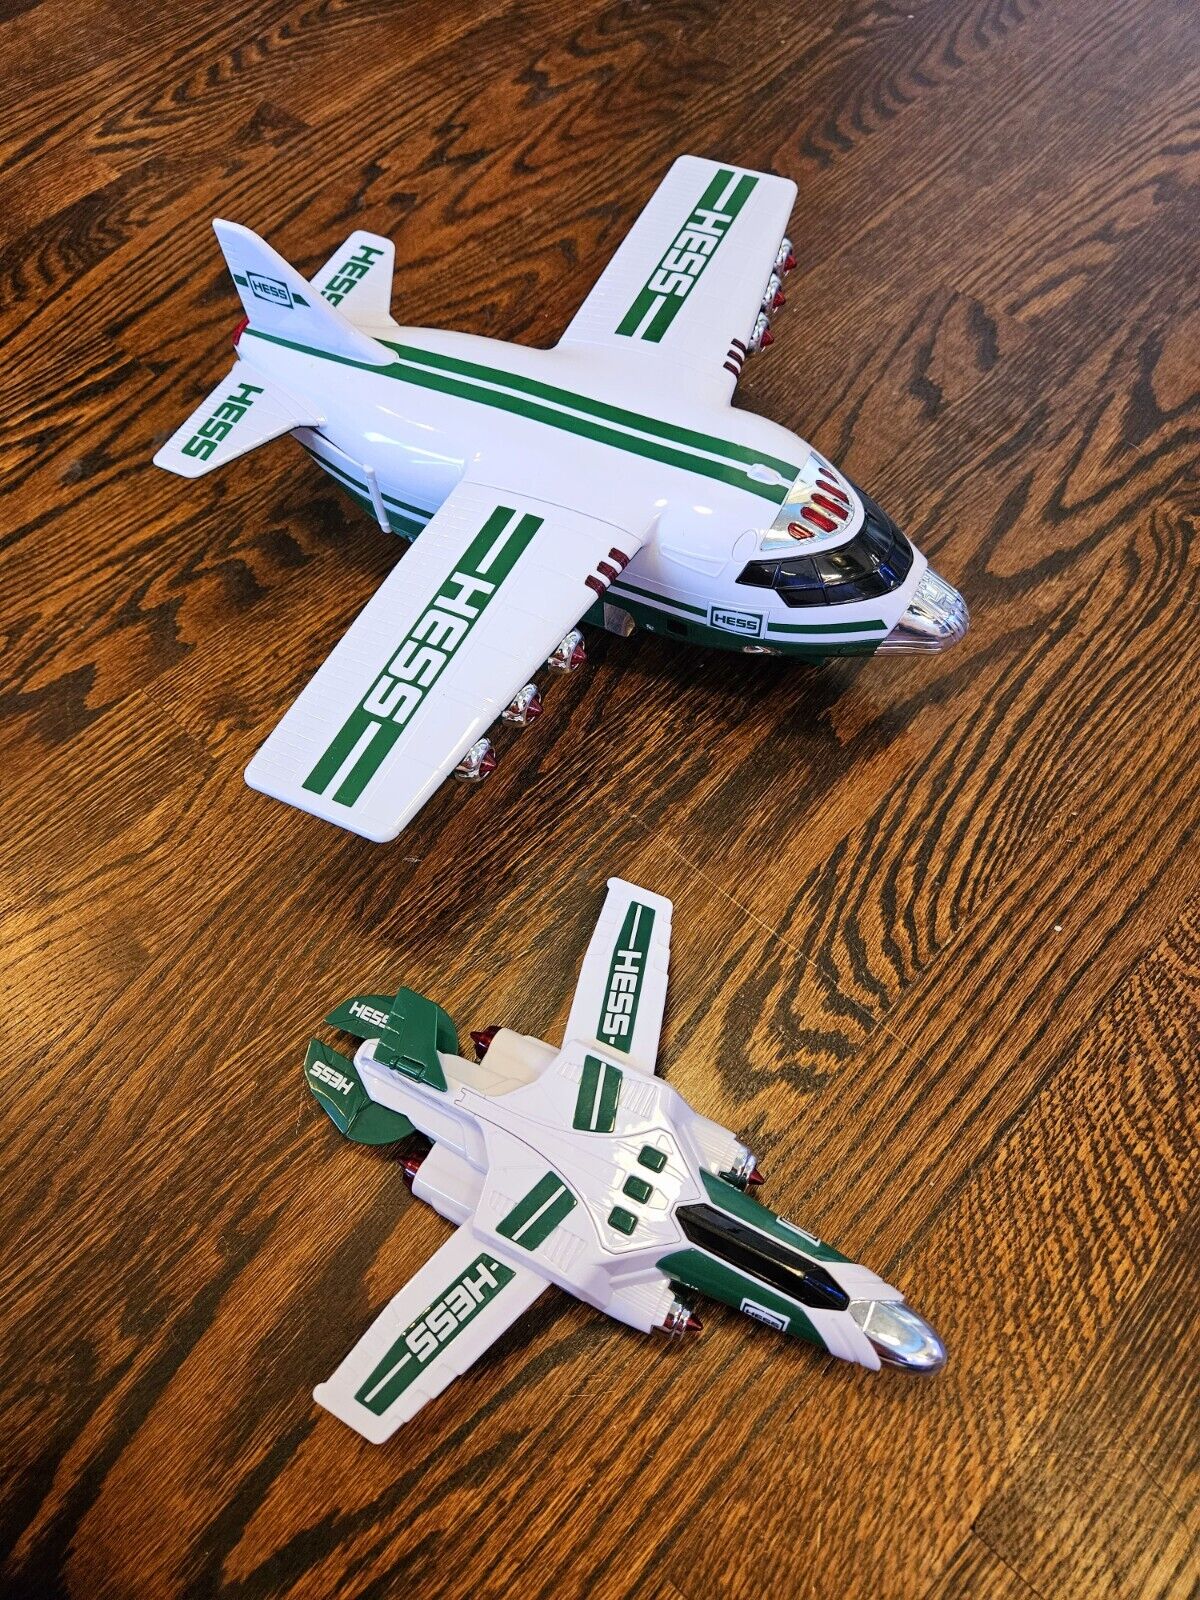 2021 HESS TRUCK COLLECTIBLE TOY CARGO PLANE AND JET - LED LIGHTS/SOUNDS - Tested